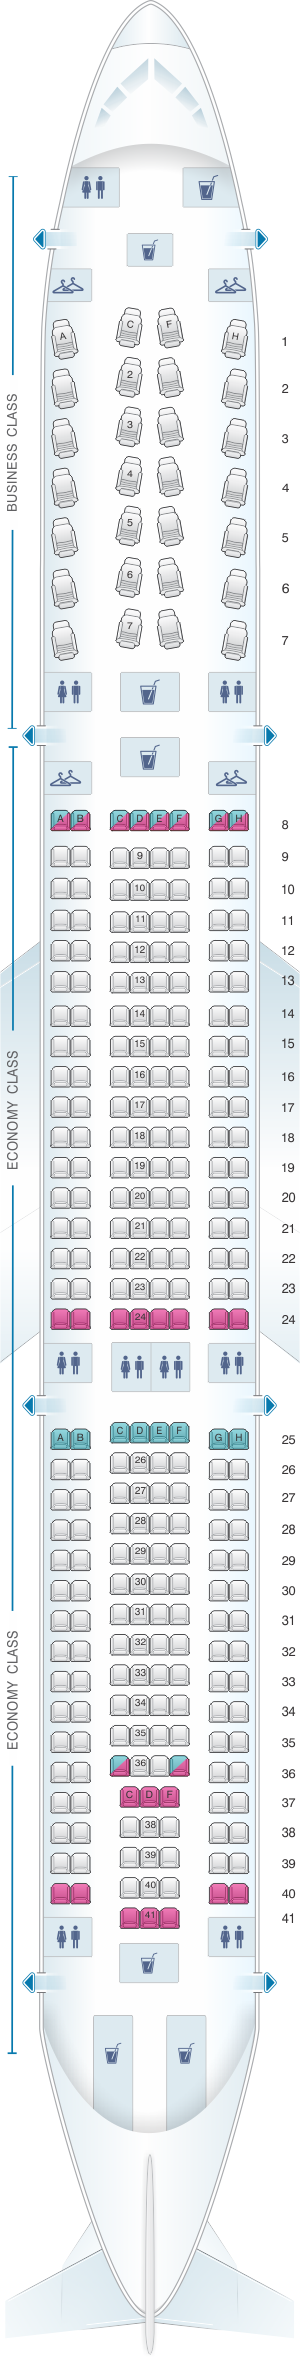 Seat Map American Airlines Airbus A330 300 | SeatMaestro